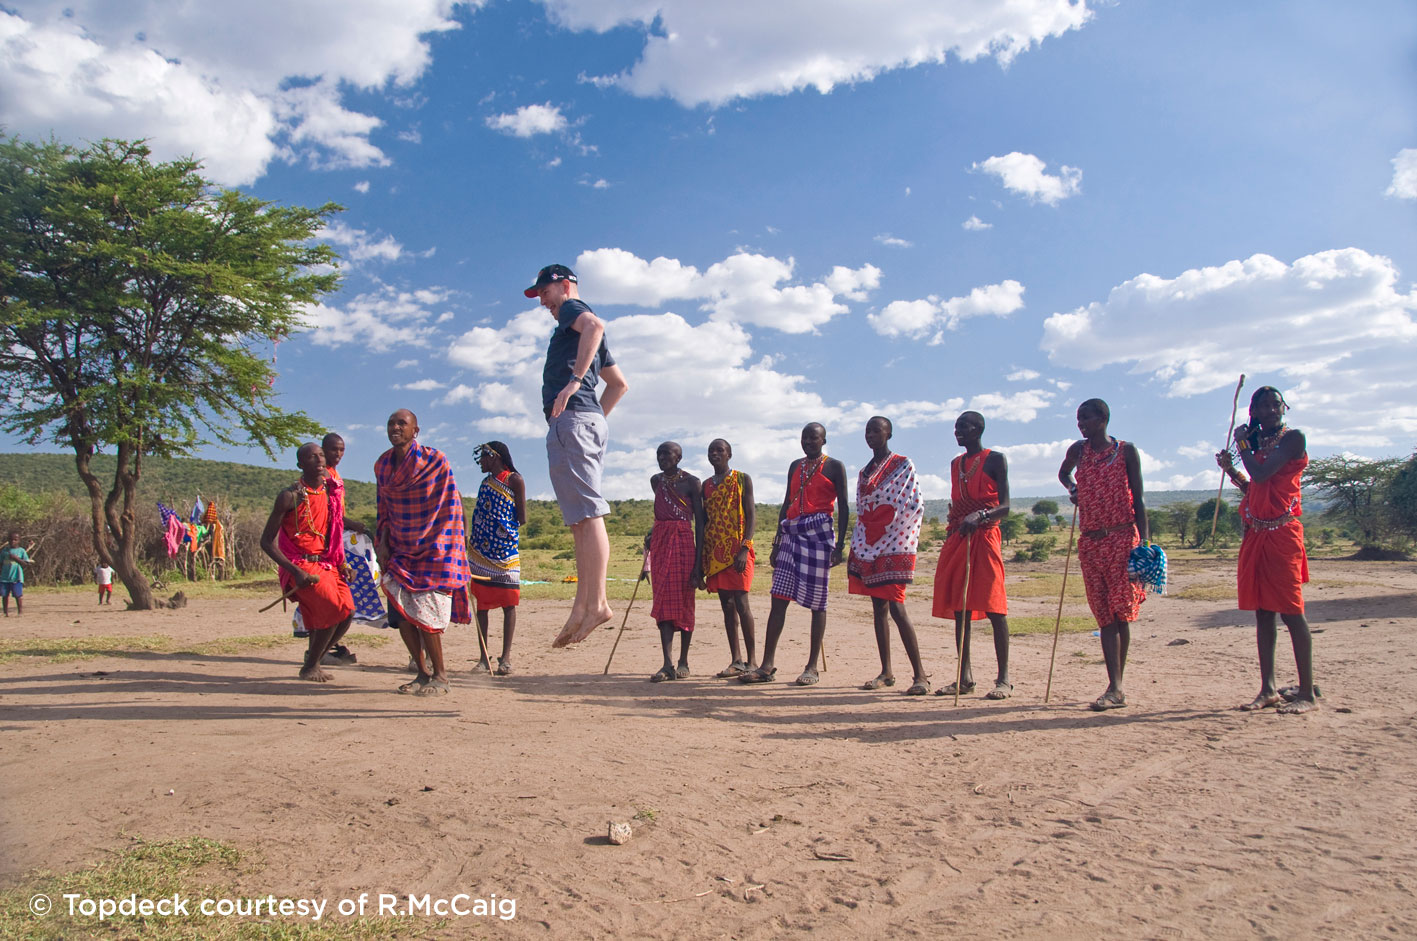 Image 6.	Jumping with the warriors: we visited a local Maasai village where the people live in the traditional way, in mud huts and herding cows and goats. The men did a performance for us, singing us their traditional songs and invited the other guys from our group to jump with them.